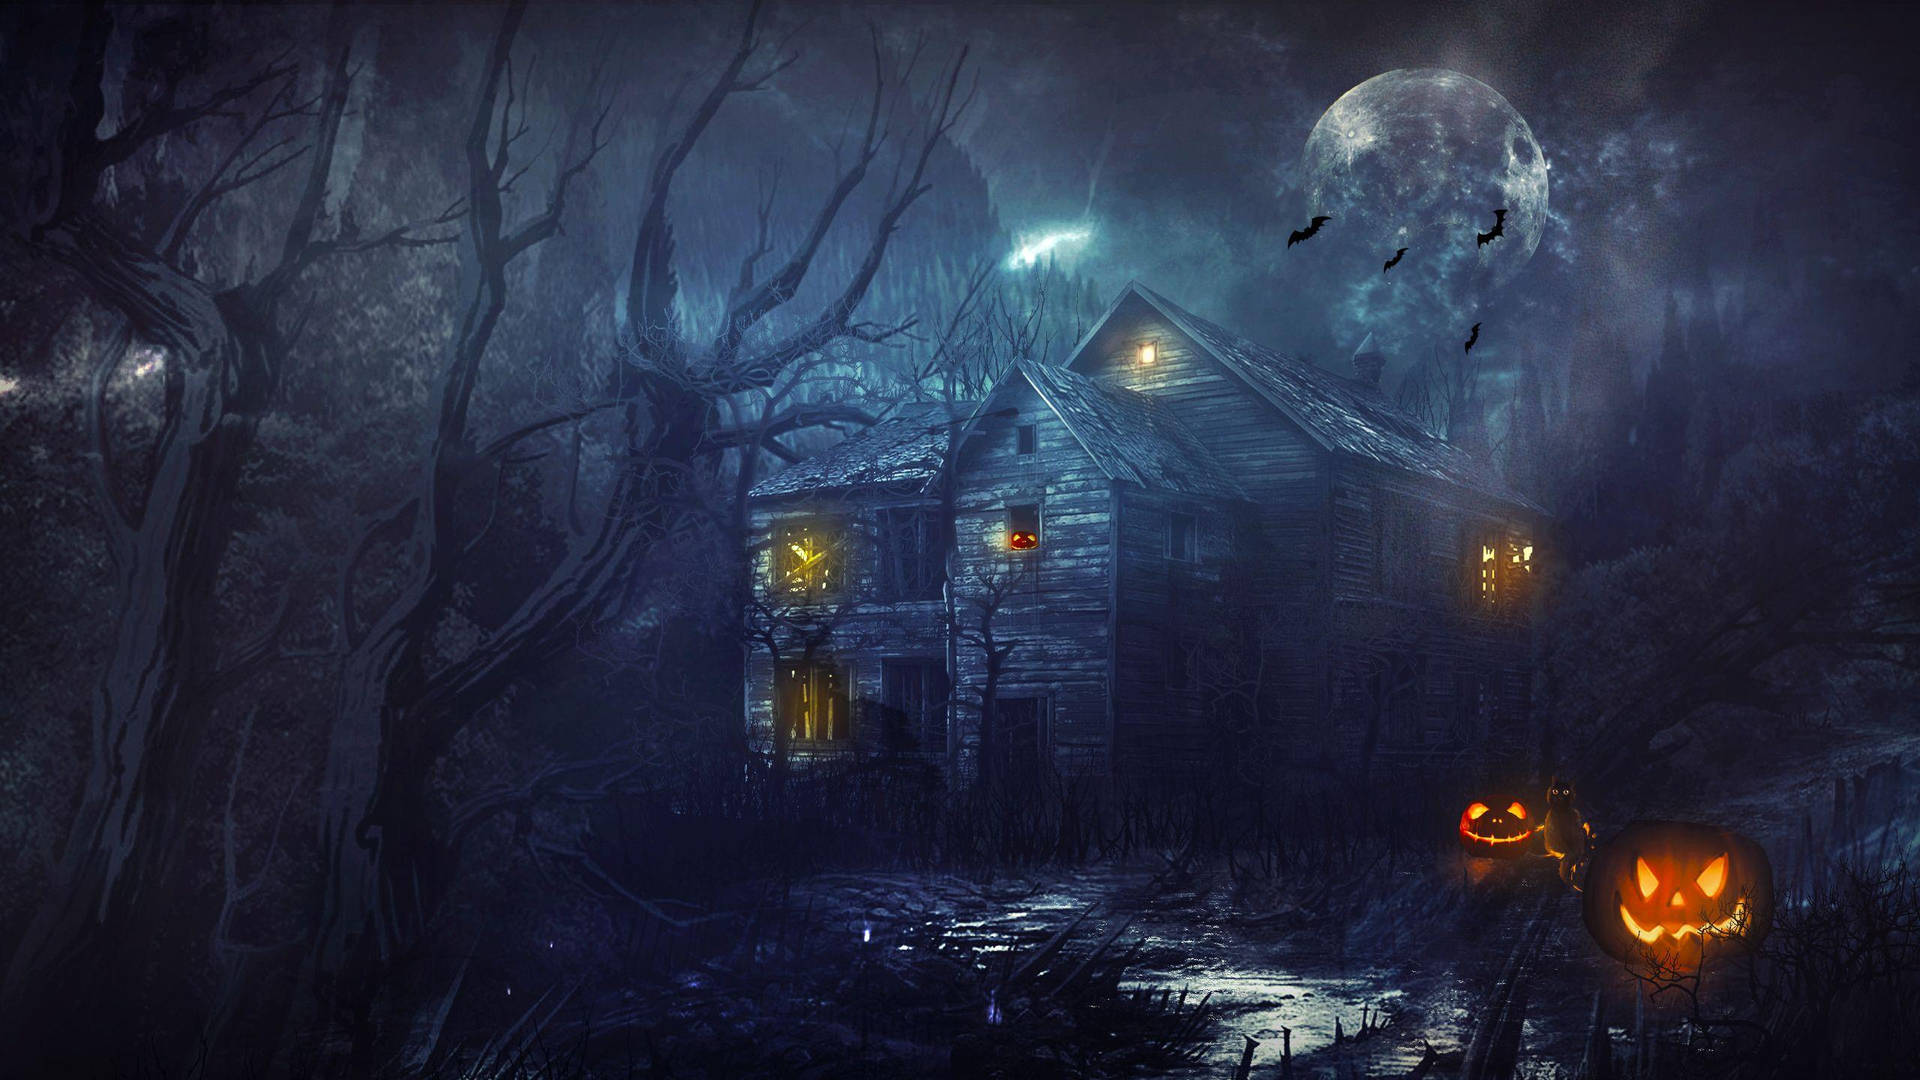 Get Ready To Be Spooked This Halloween At The Haunted House Wallpaper